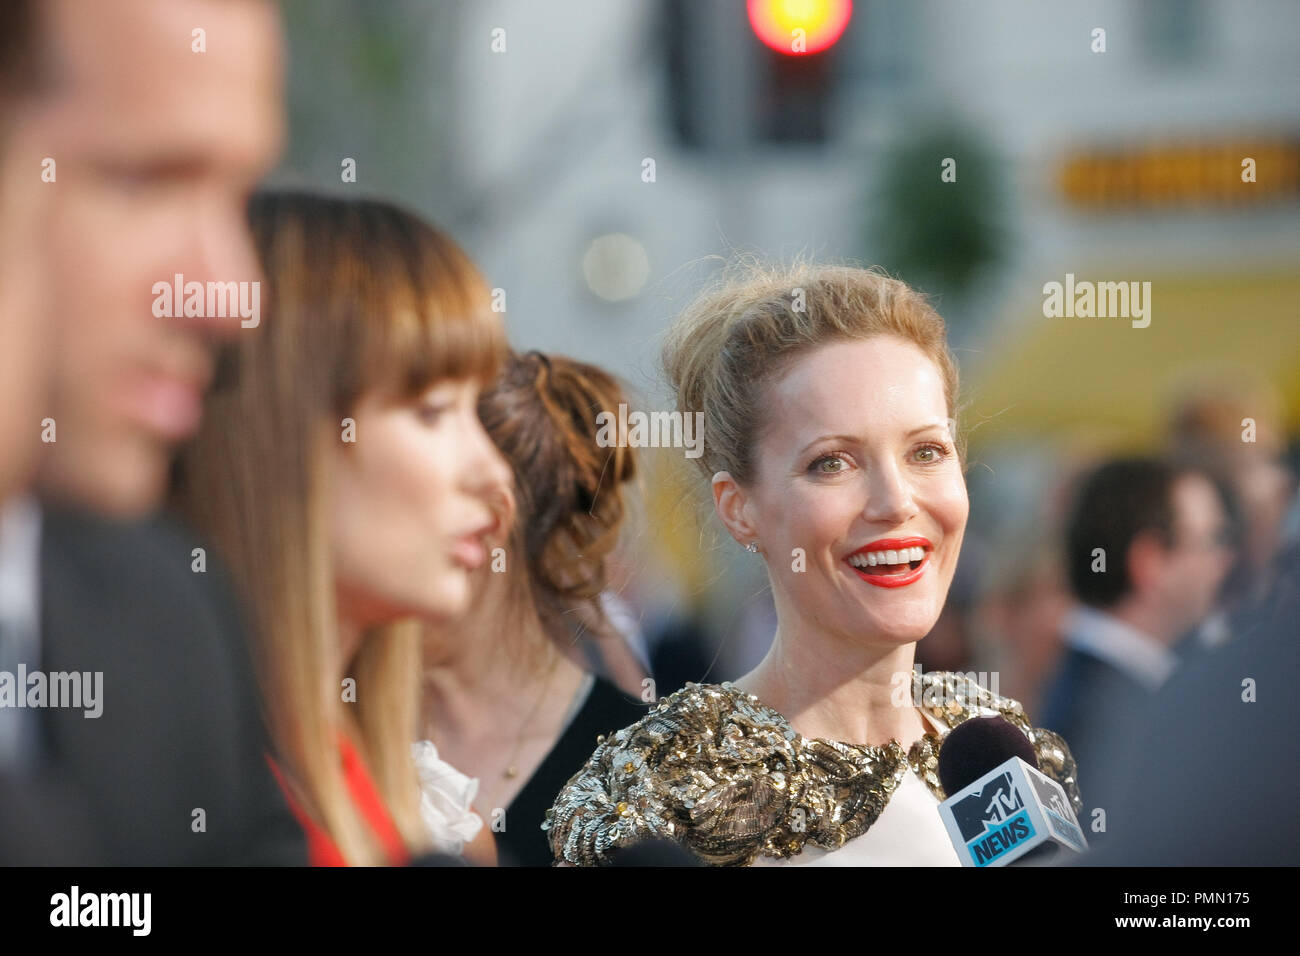 https://c8.alamy.com/comp/PMN175/leslie-mann-at-the-world-premiere-of-universal-pictures-the-change-up-arrivals-held-at-the-village-theatre-in-westwood-ca-august-1-2011-photo-by-joe-martinez-picturelux-PMN175.jpg